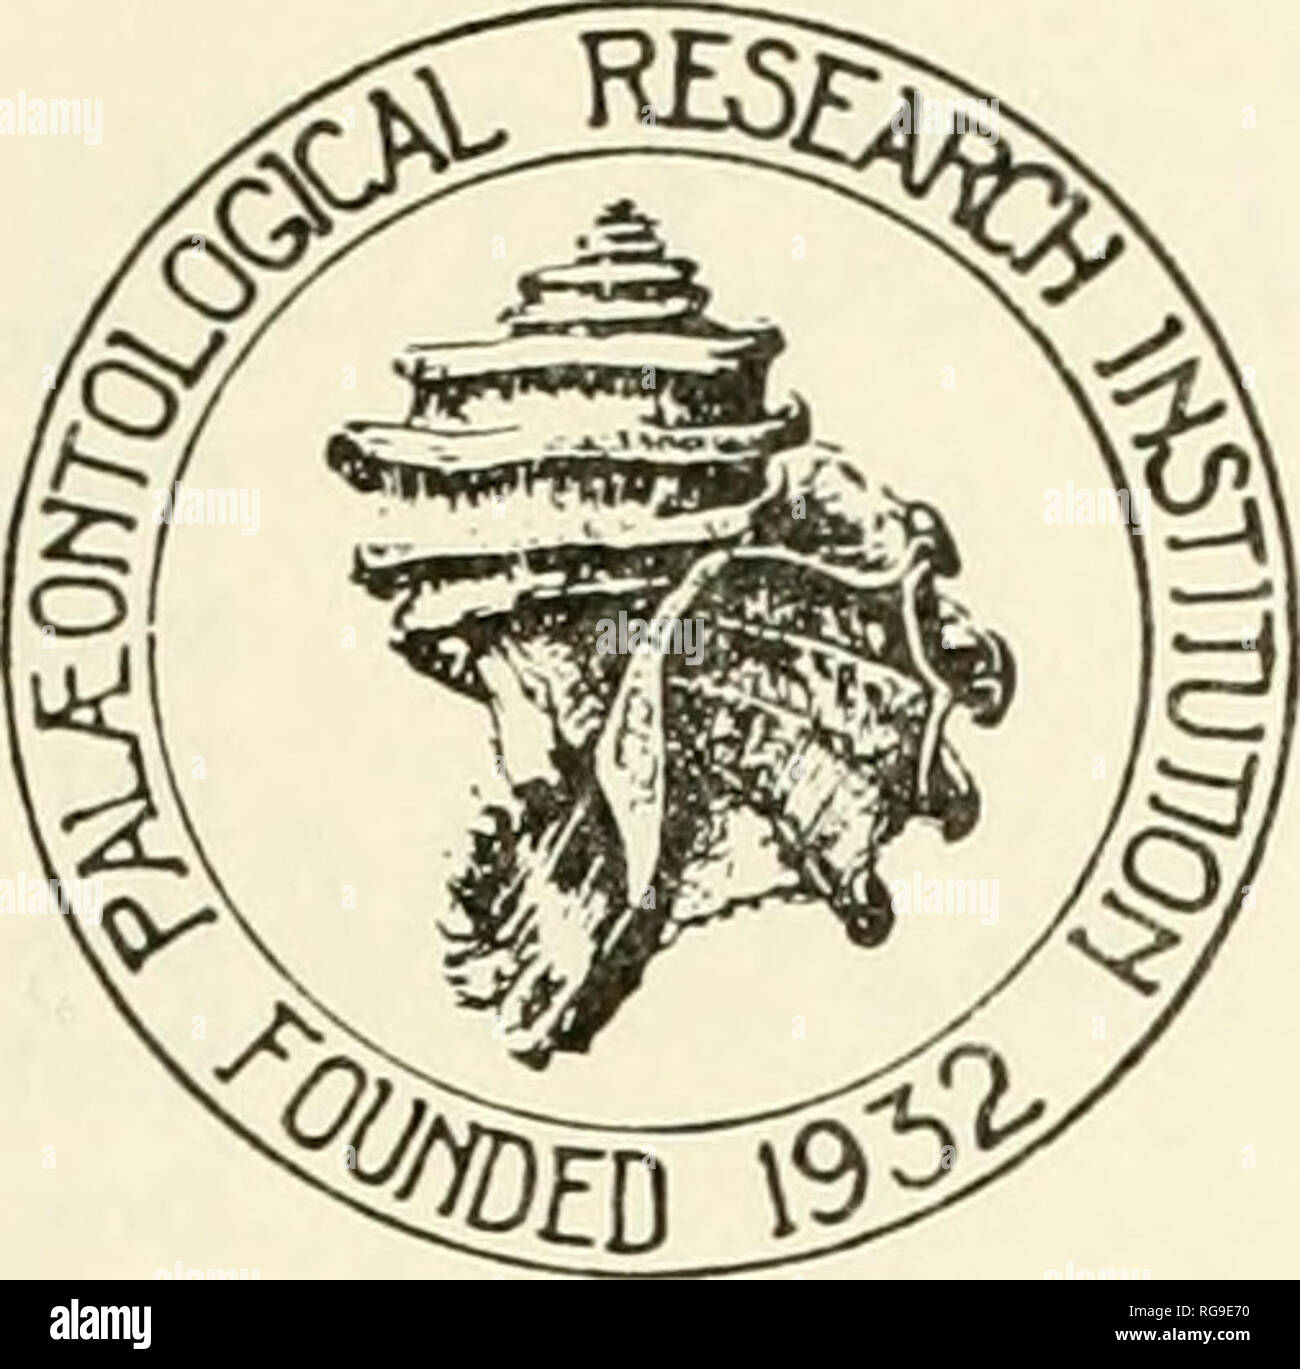 . Bulletins of American paleontology. . The Paleontological Research Institution acknowledges with special thanks the contributions of the following individuals and institutions ($1000 or 'more at Armand L. Adams (1976) James A. Allen (1967) American Oil Company (1976) Atlantic Richfield Company (1978) Miss Ethel Z. Bailey (1970) Christina L. Balk (1970) Mr. &amp; Mrs. Kenneth E. Caster (1967 Chevron Oil Company (1978) Exxon Company (1977 to date) Lois S. Fogelsanger (1966) Gulf Oil Corporation (1978) Merrill W. Haas (1975) PATRONS the discretion of the contributor) Miss Rebecca S. Harris (196 Stock Photo